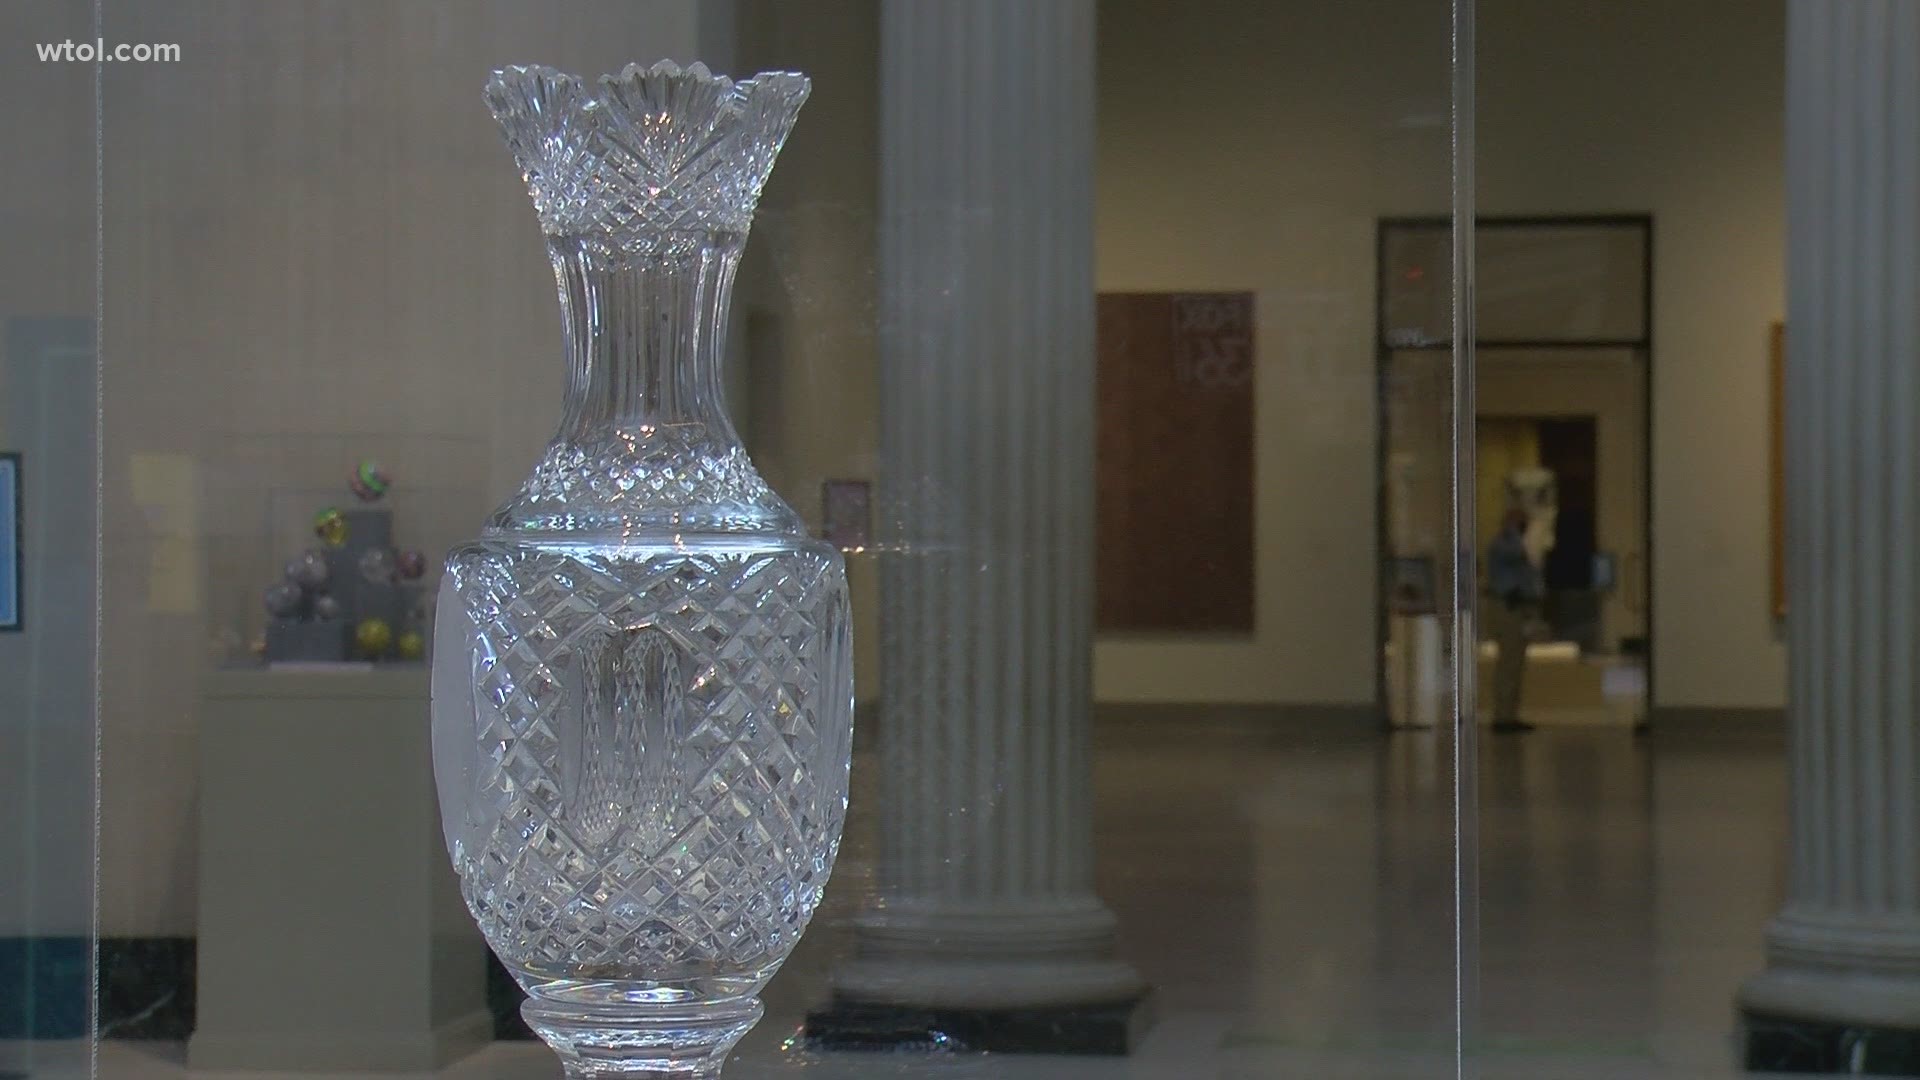 The Solheim Cup is a biennial golf tournament for the LPGA, which will be held this year in Toledo. The trophy is Waterford Crystal, weighing in at over 20 pounds!